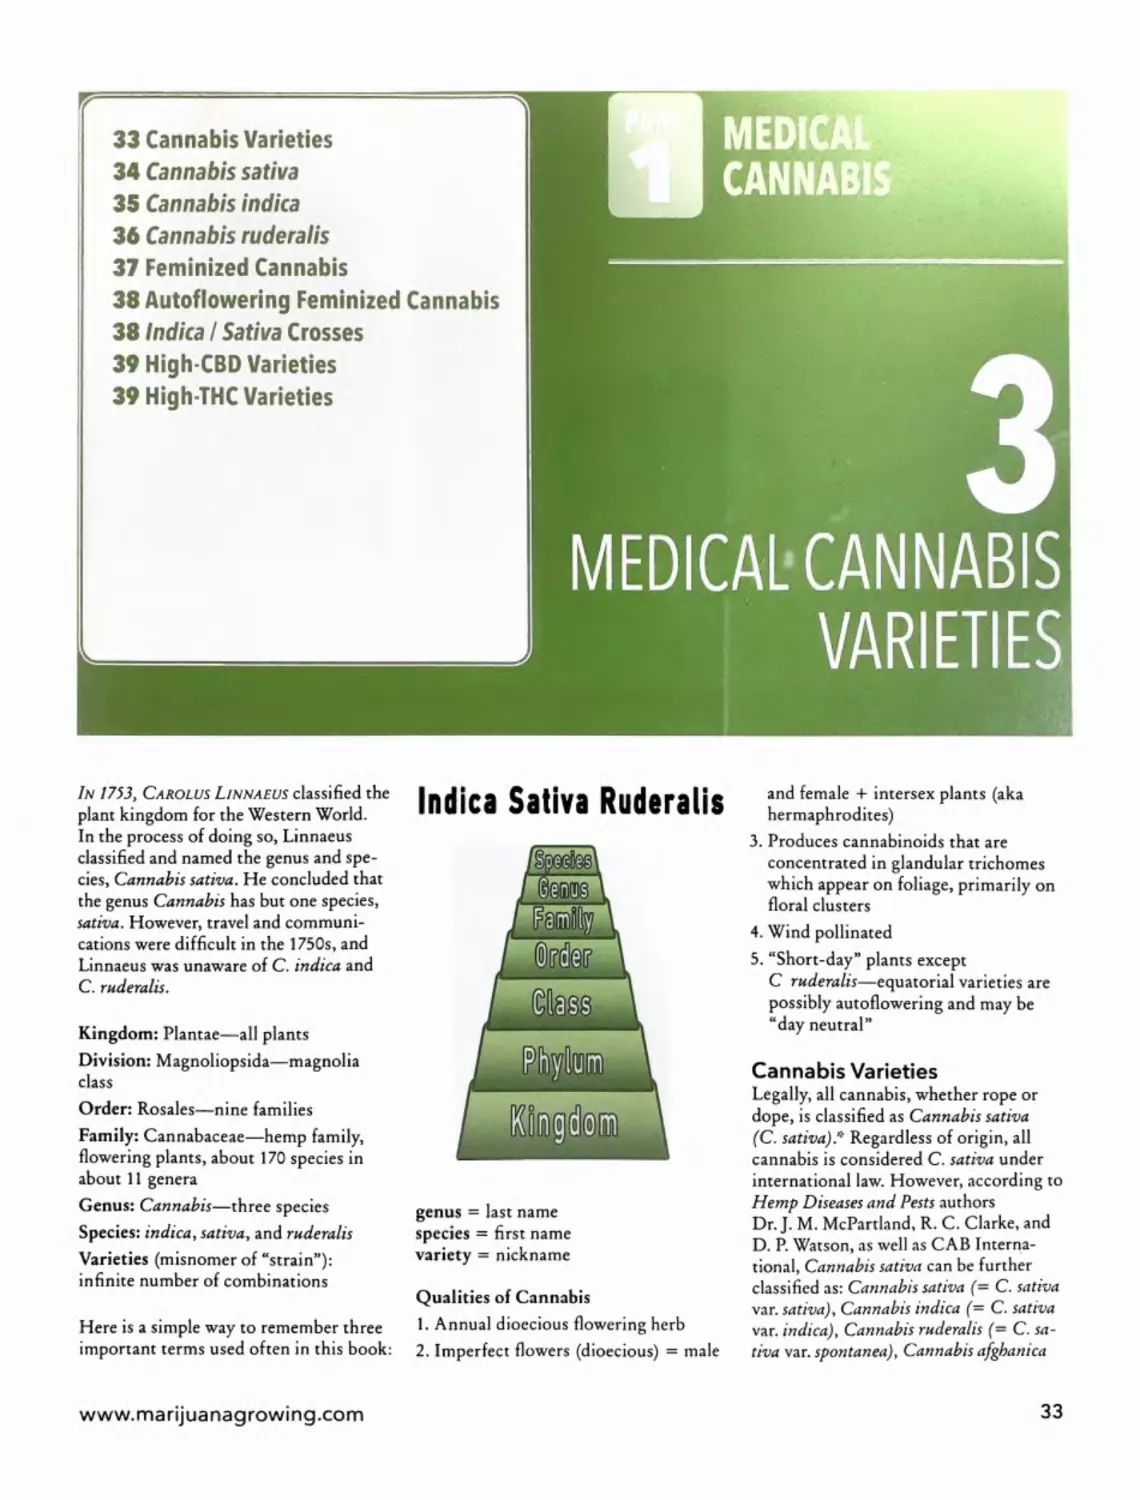 Chapter 3 - Medical Cannabis Varieties